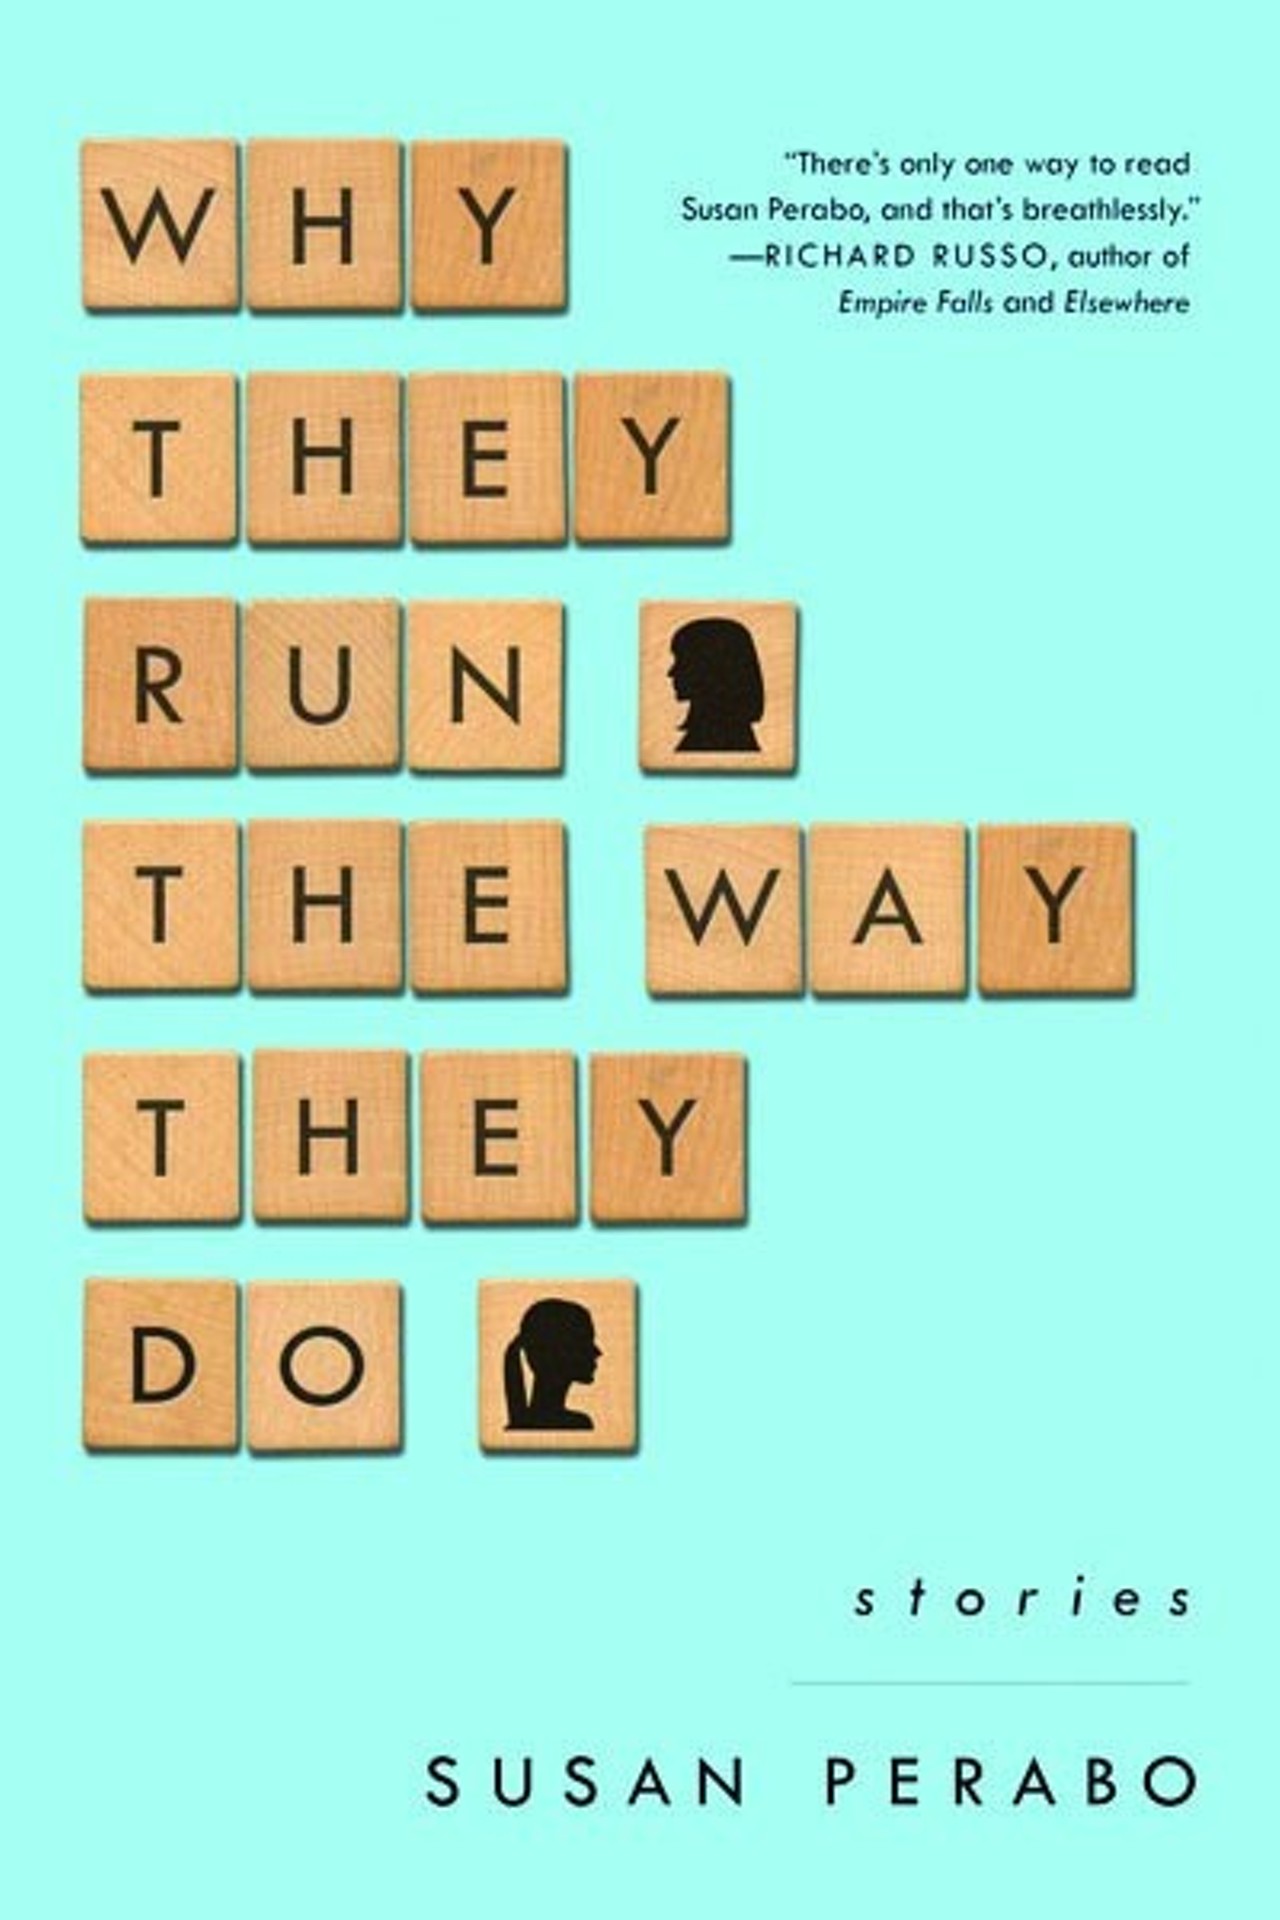 Why They Run The Way They Do by Susan Perabo -
In this humorous and emotional collection of short stories, Perabo writes about everyday situations. But what at first may seem like straightforward, mundane tales actually spin into surprising and at times disturbing conclusions. Perabo, like many short story writers before her, has been generously compared to the master of the short story, Raymond Carver, and in this collection at least, it's easy to see why.